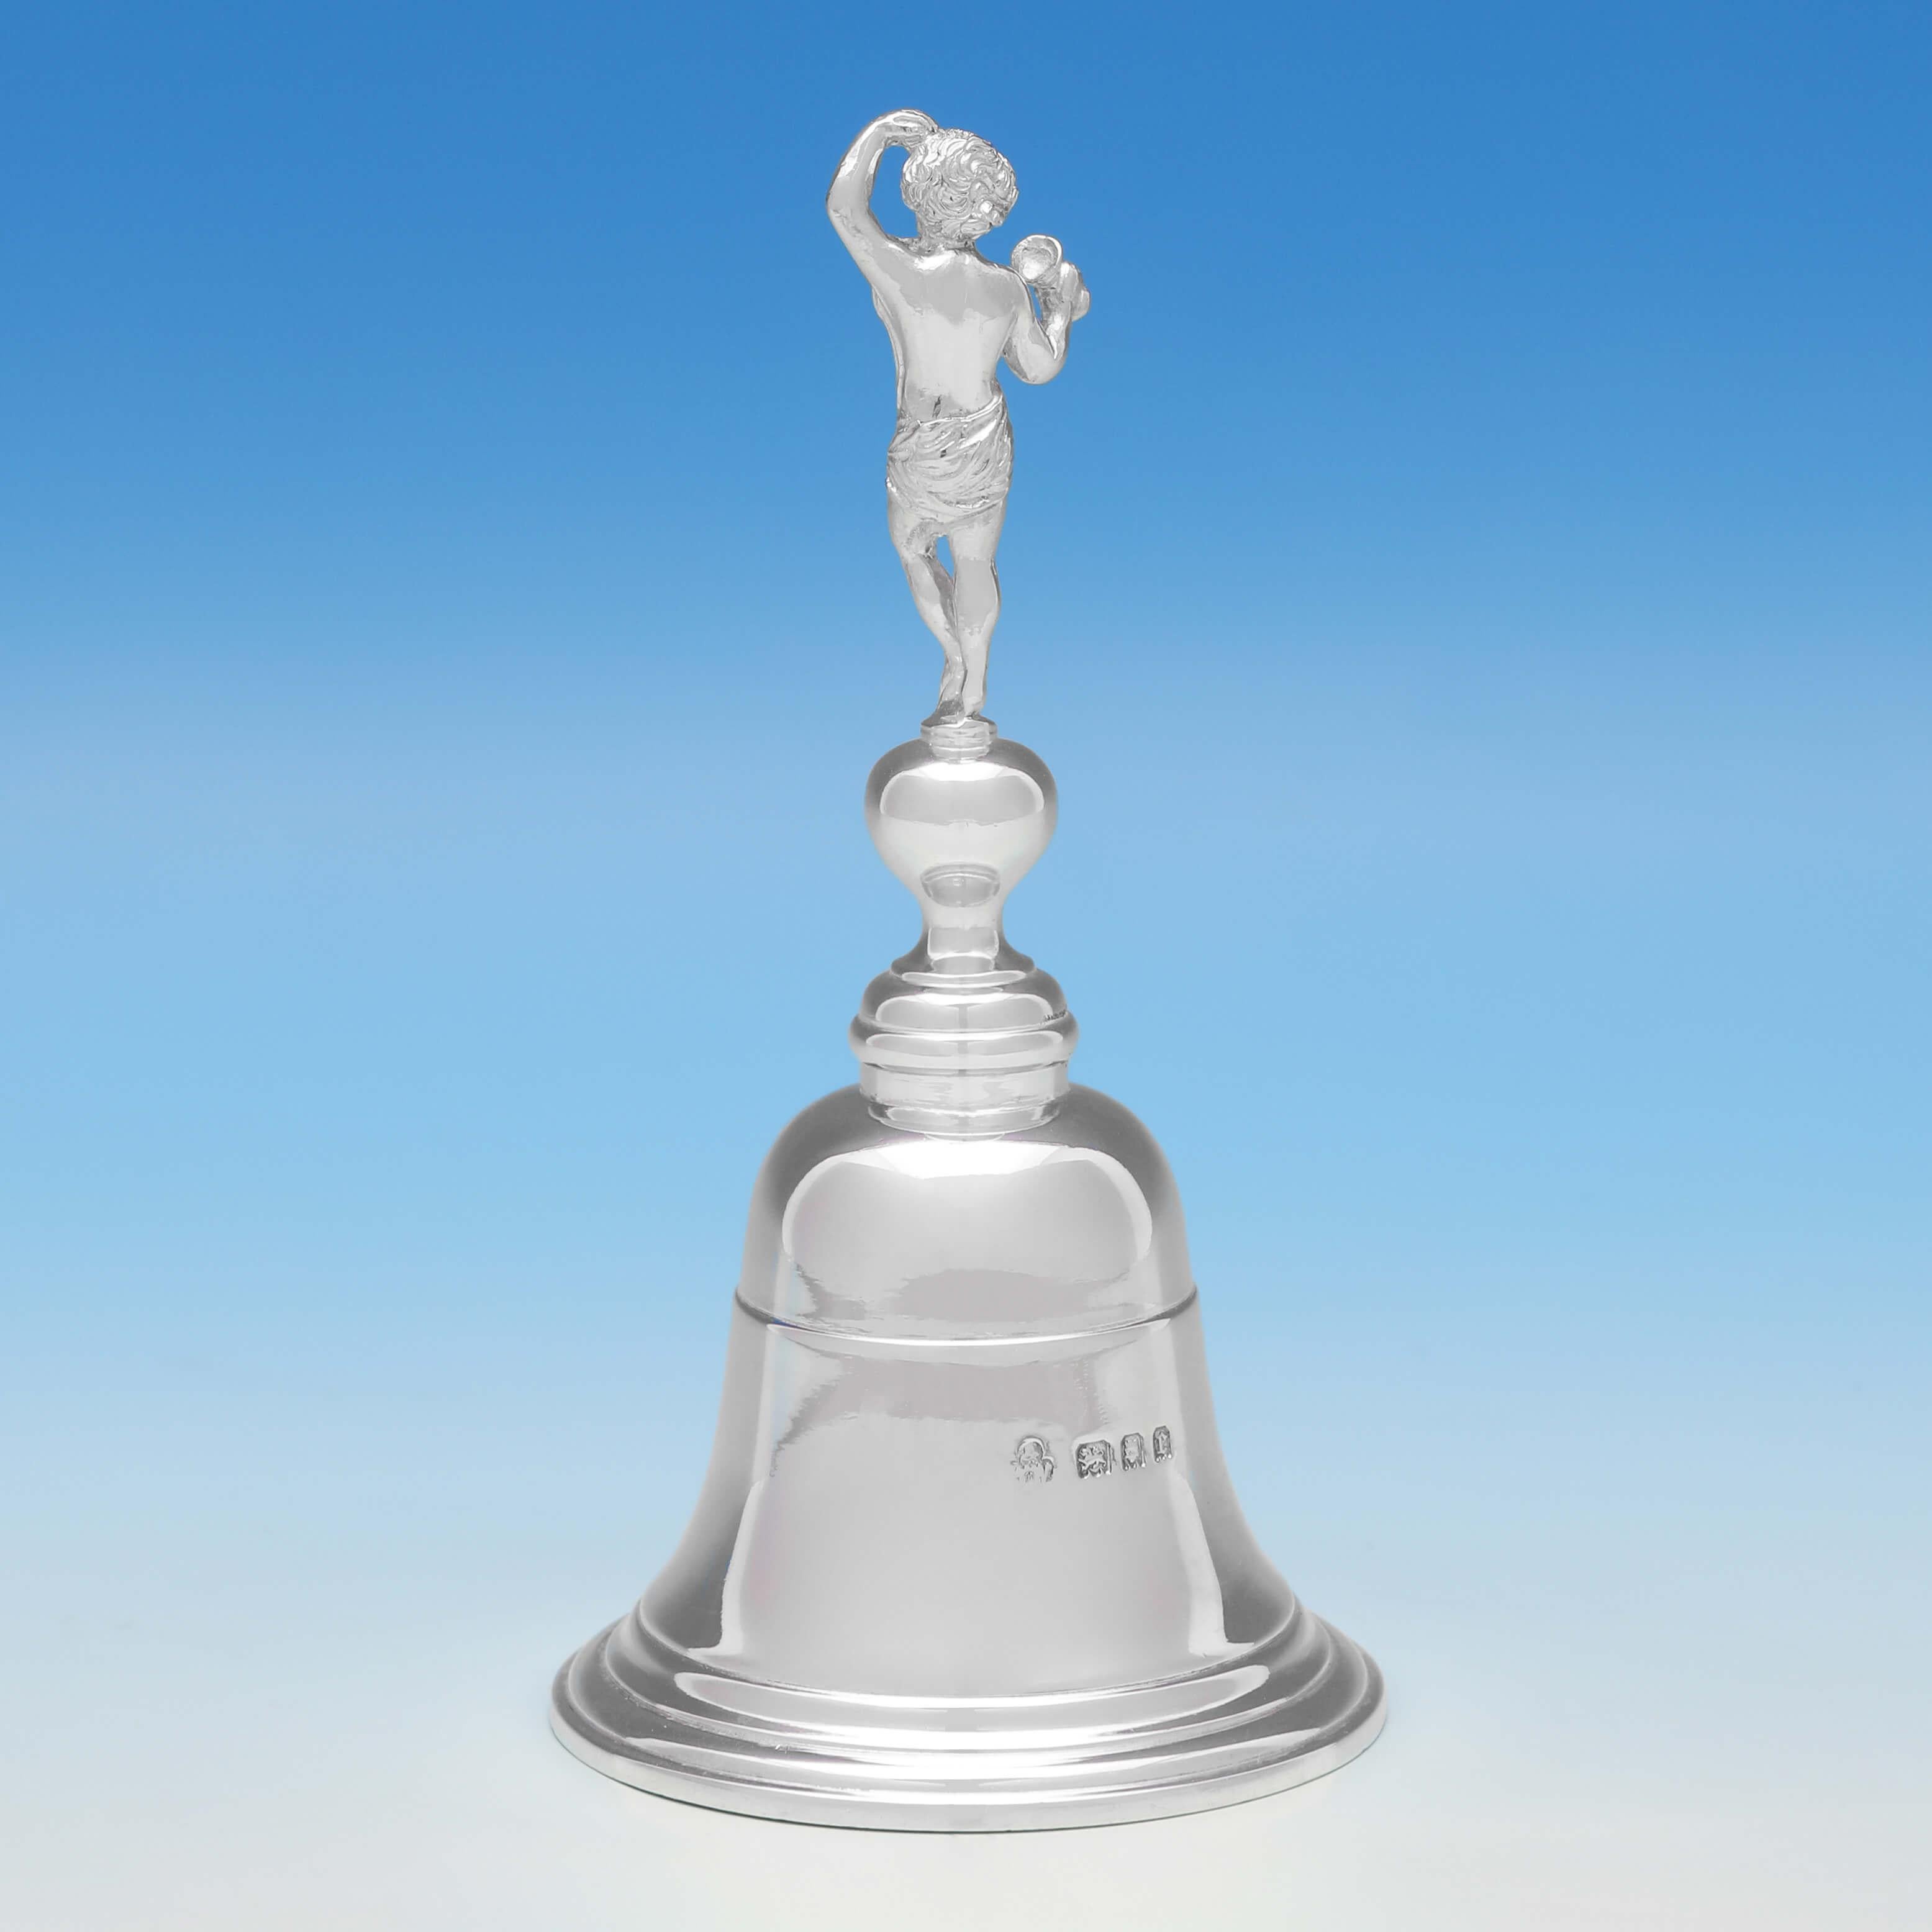 Hallmarked in London in 1920 by Wakely & Wheeler, this unusual, antique sterling silver bell, features a figural handle, and reed detailing. The bell measures 4.5